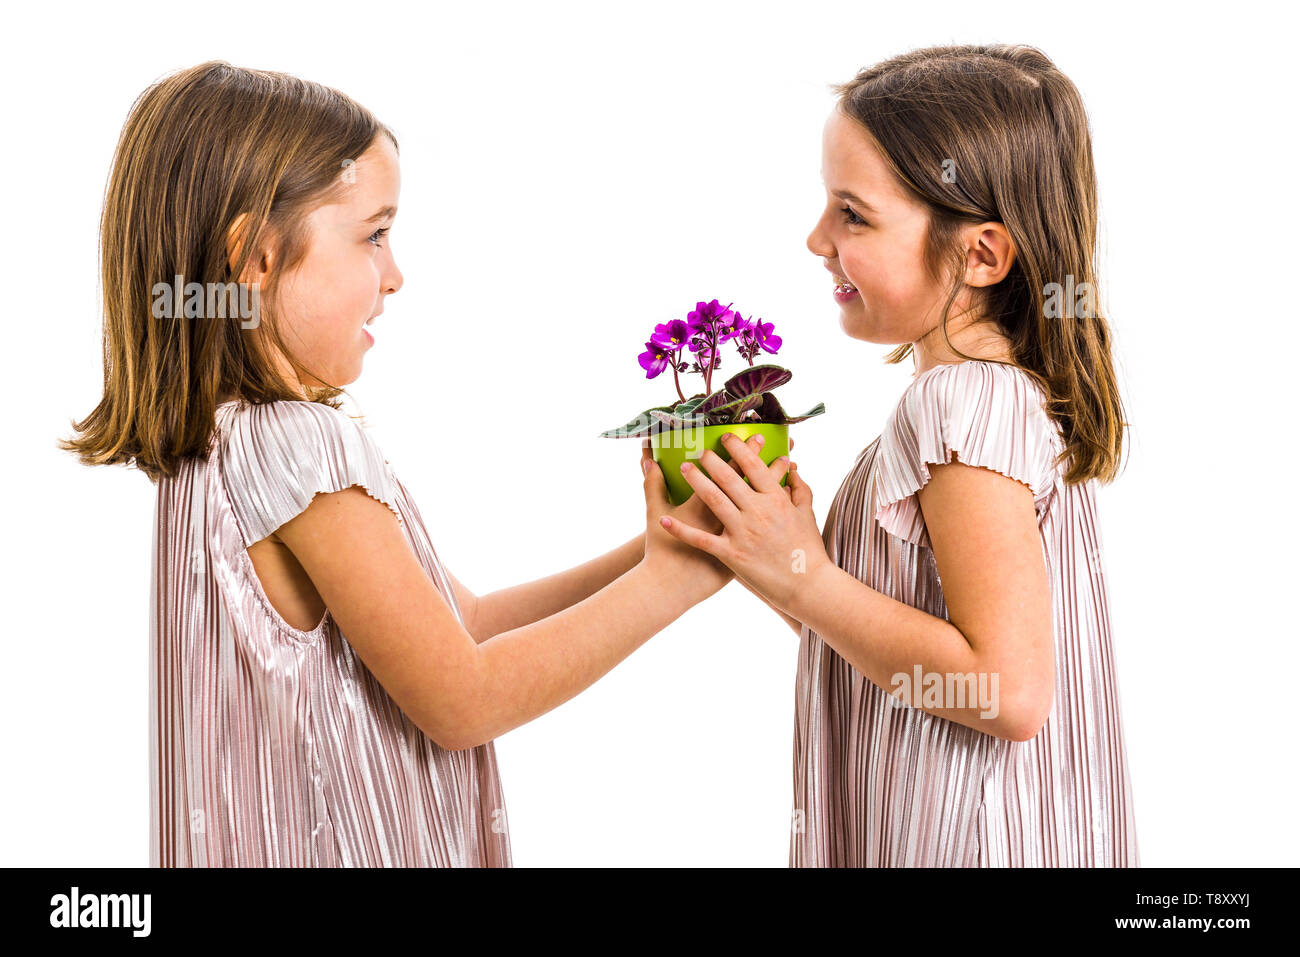 Identical twin girl giving viola flower pot to her sister. Little girl child is giving a gift or present of flowers to her sister. Profile view, studi Stock Photo